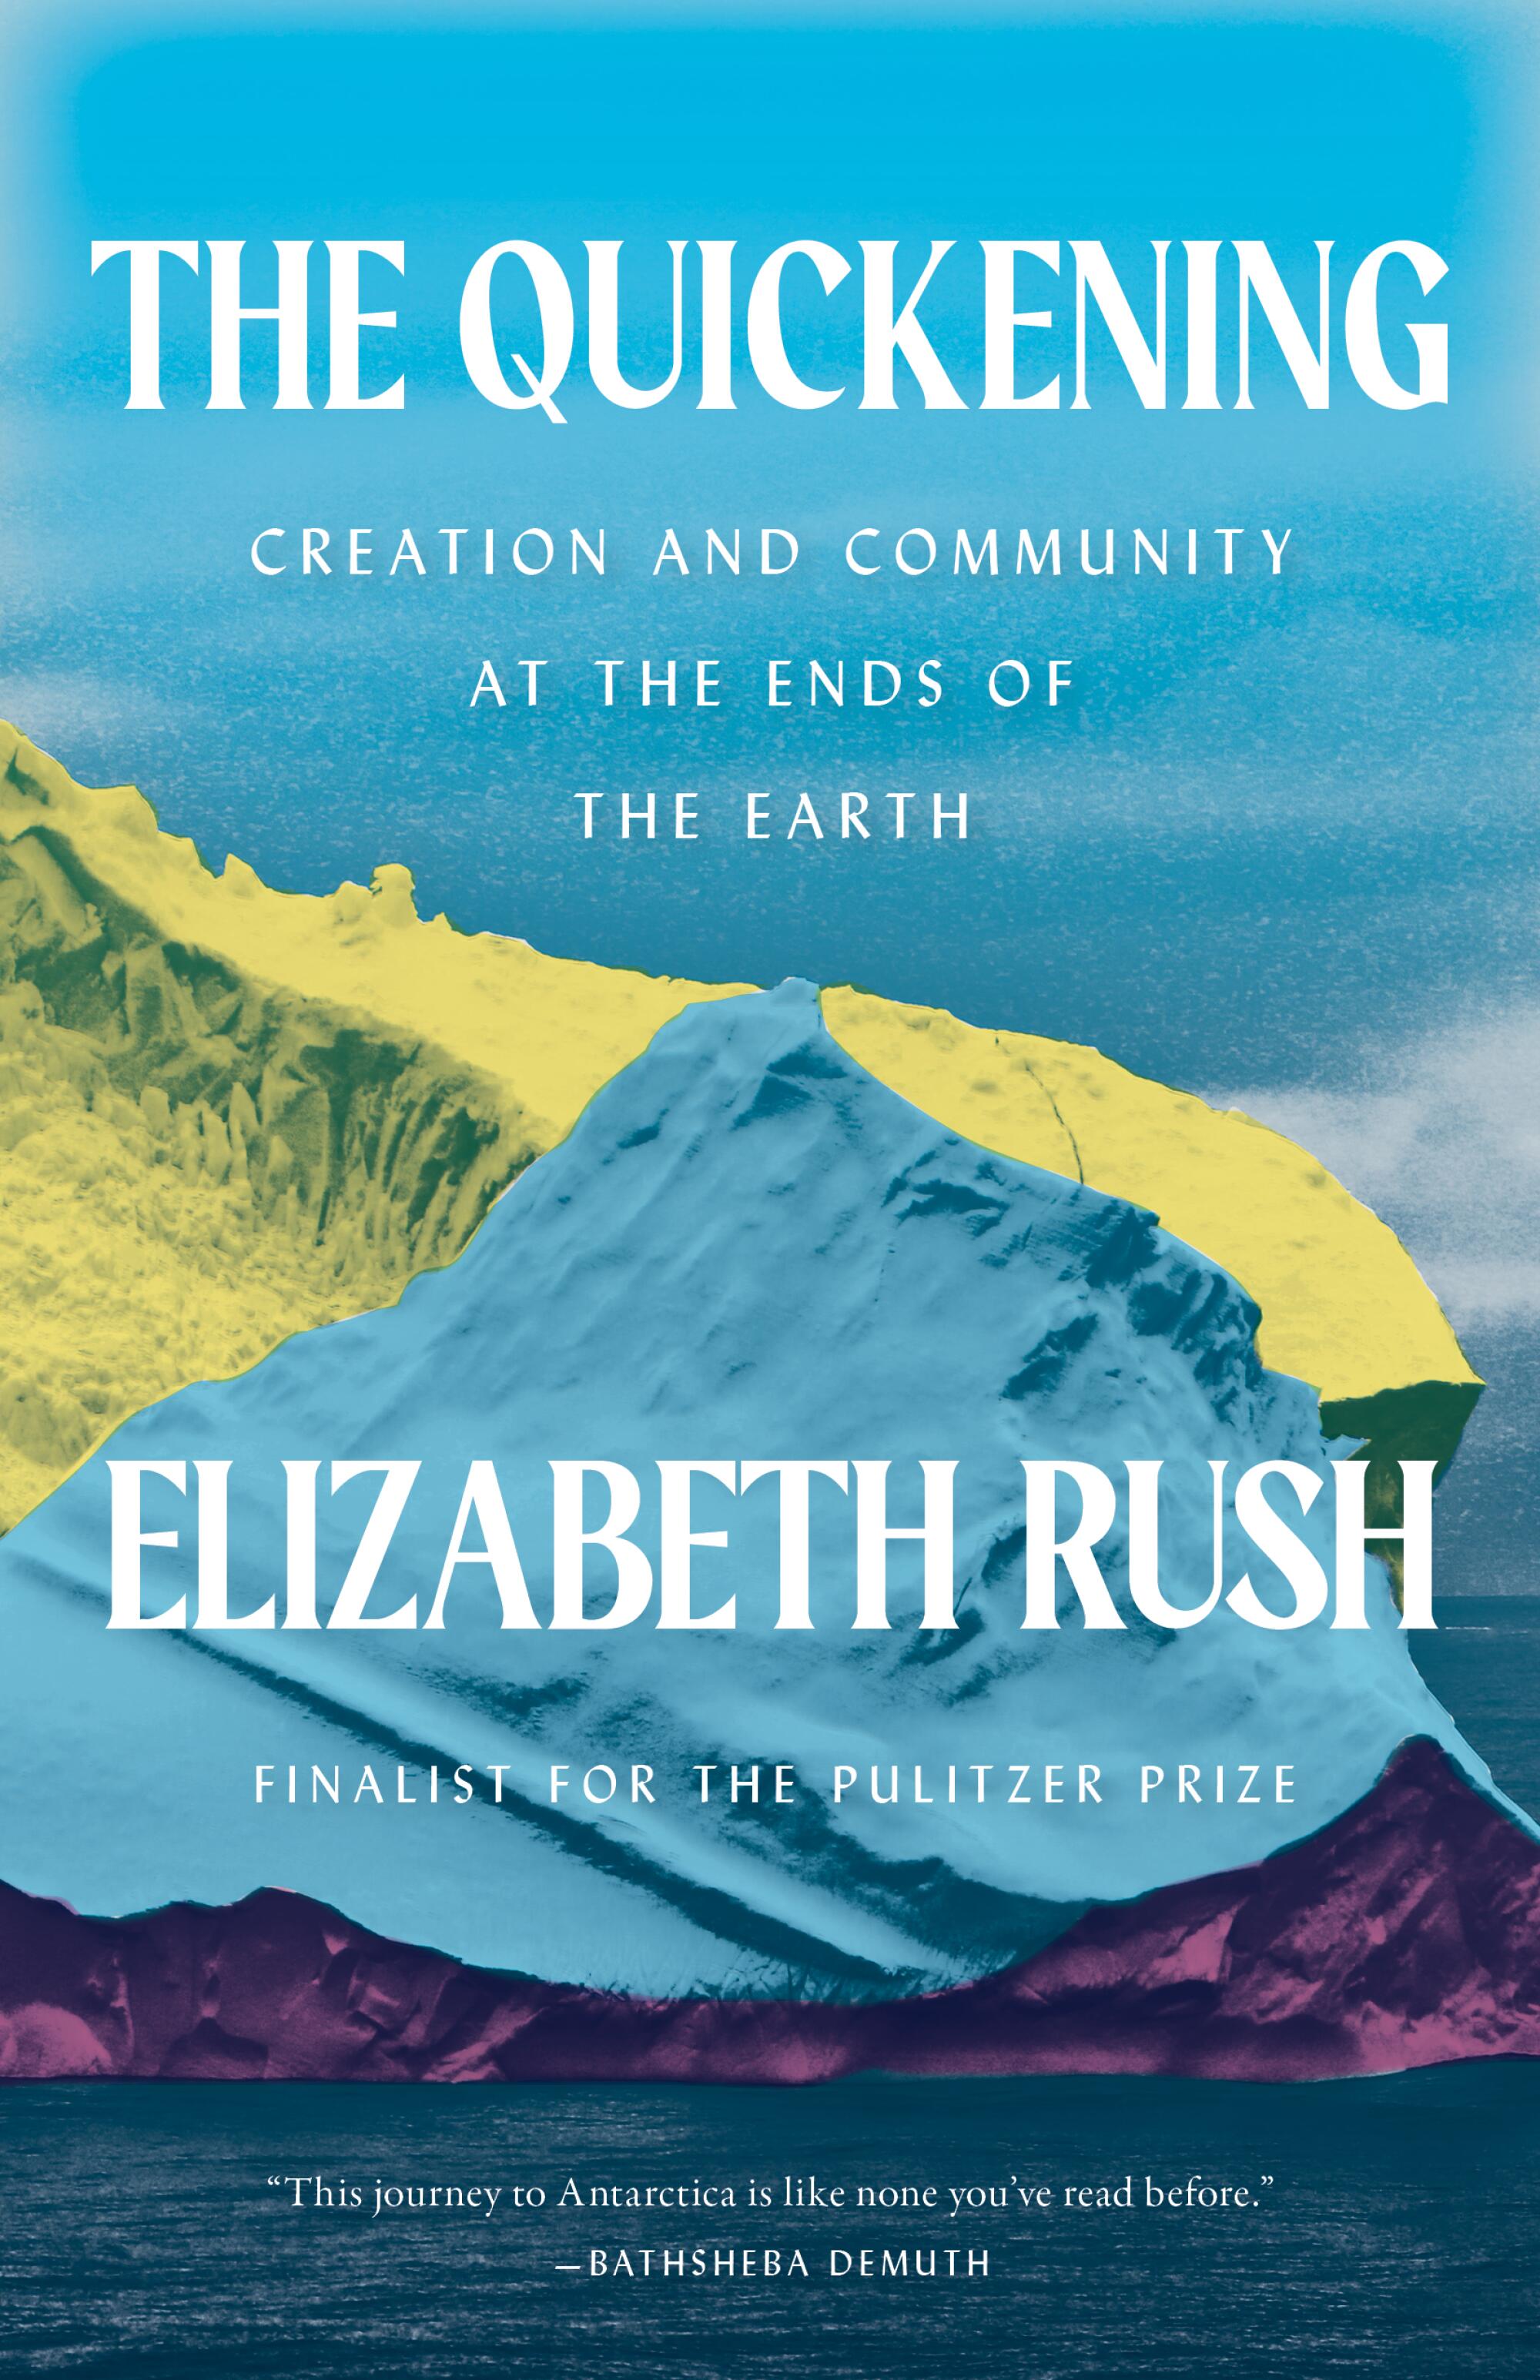 Book cover of "The Quickening" by Elizabeth Rush